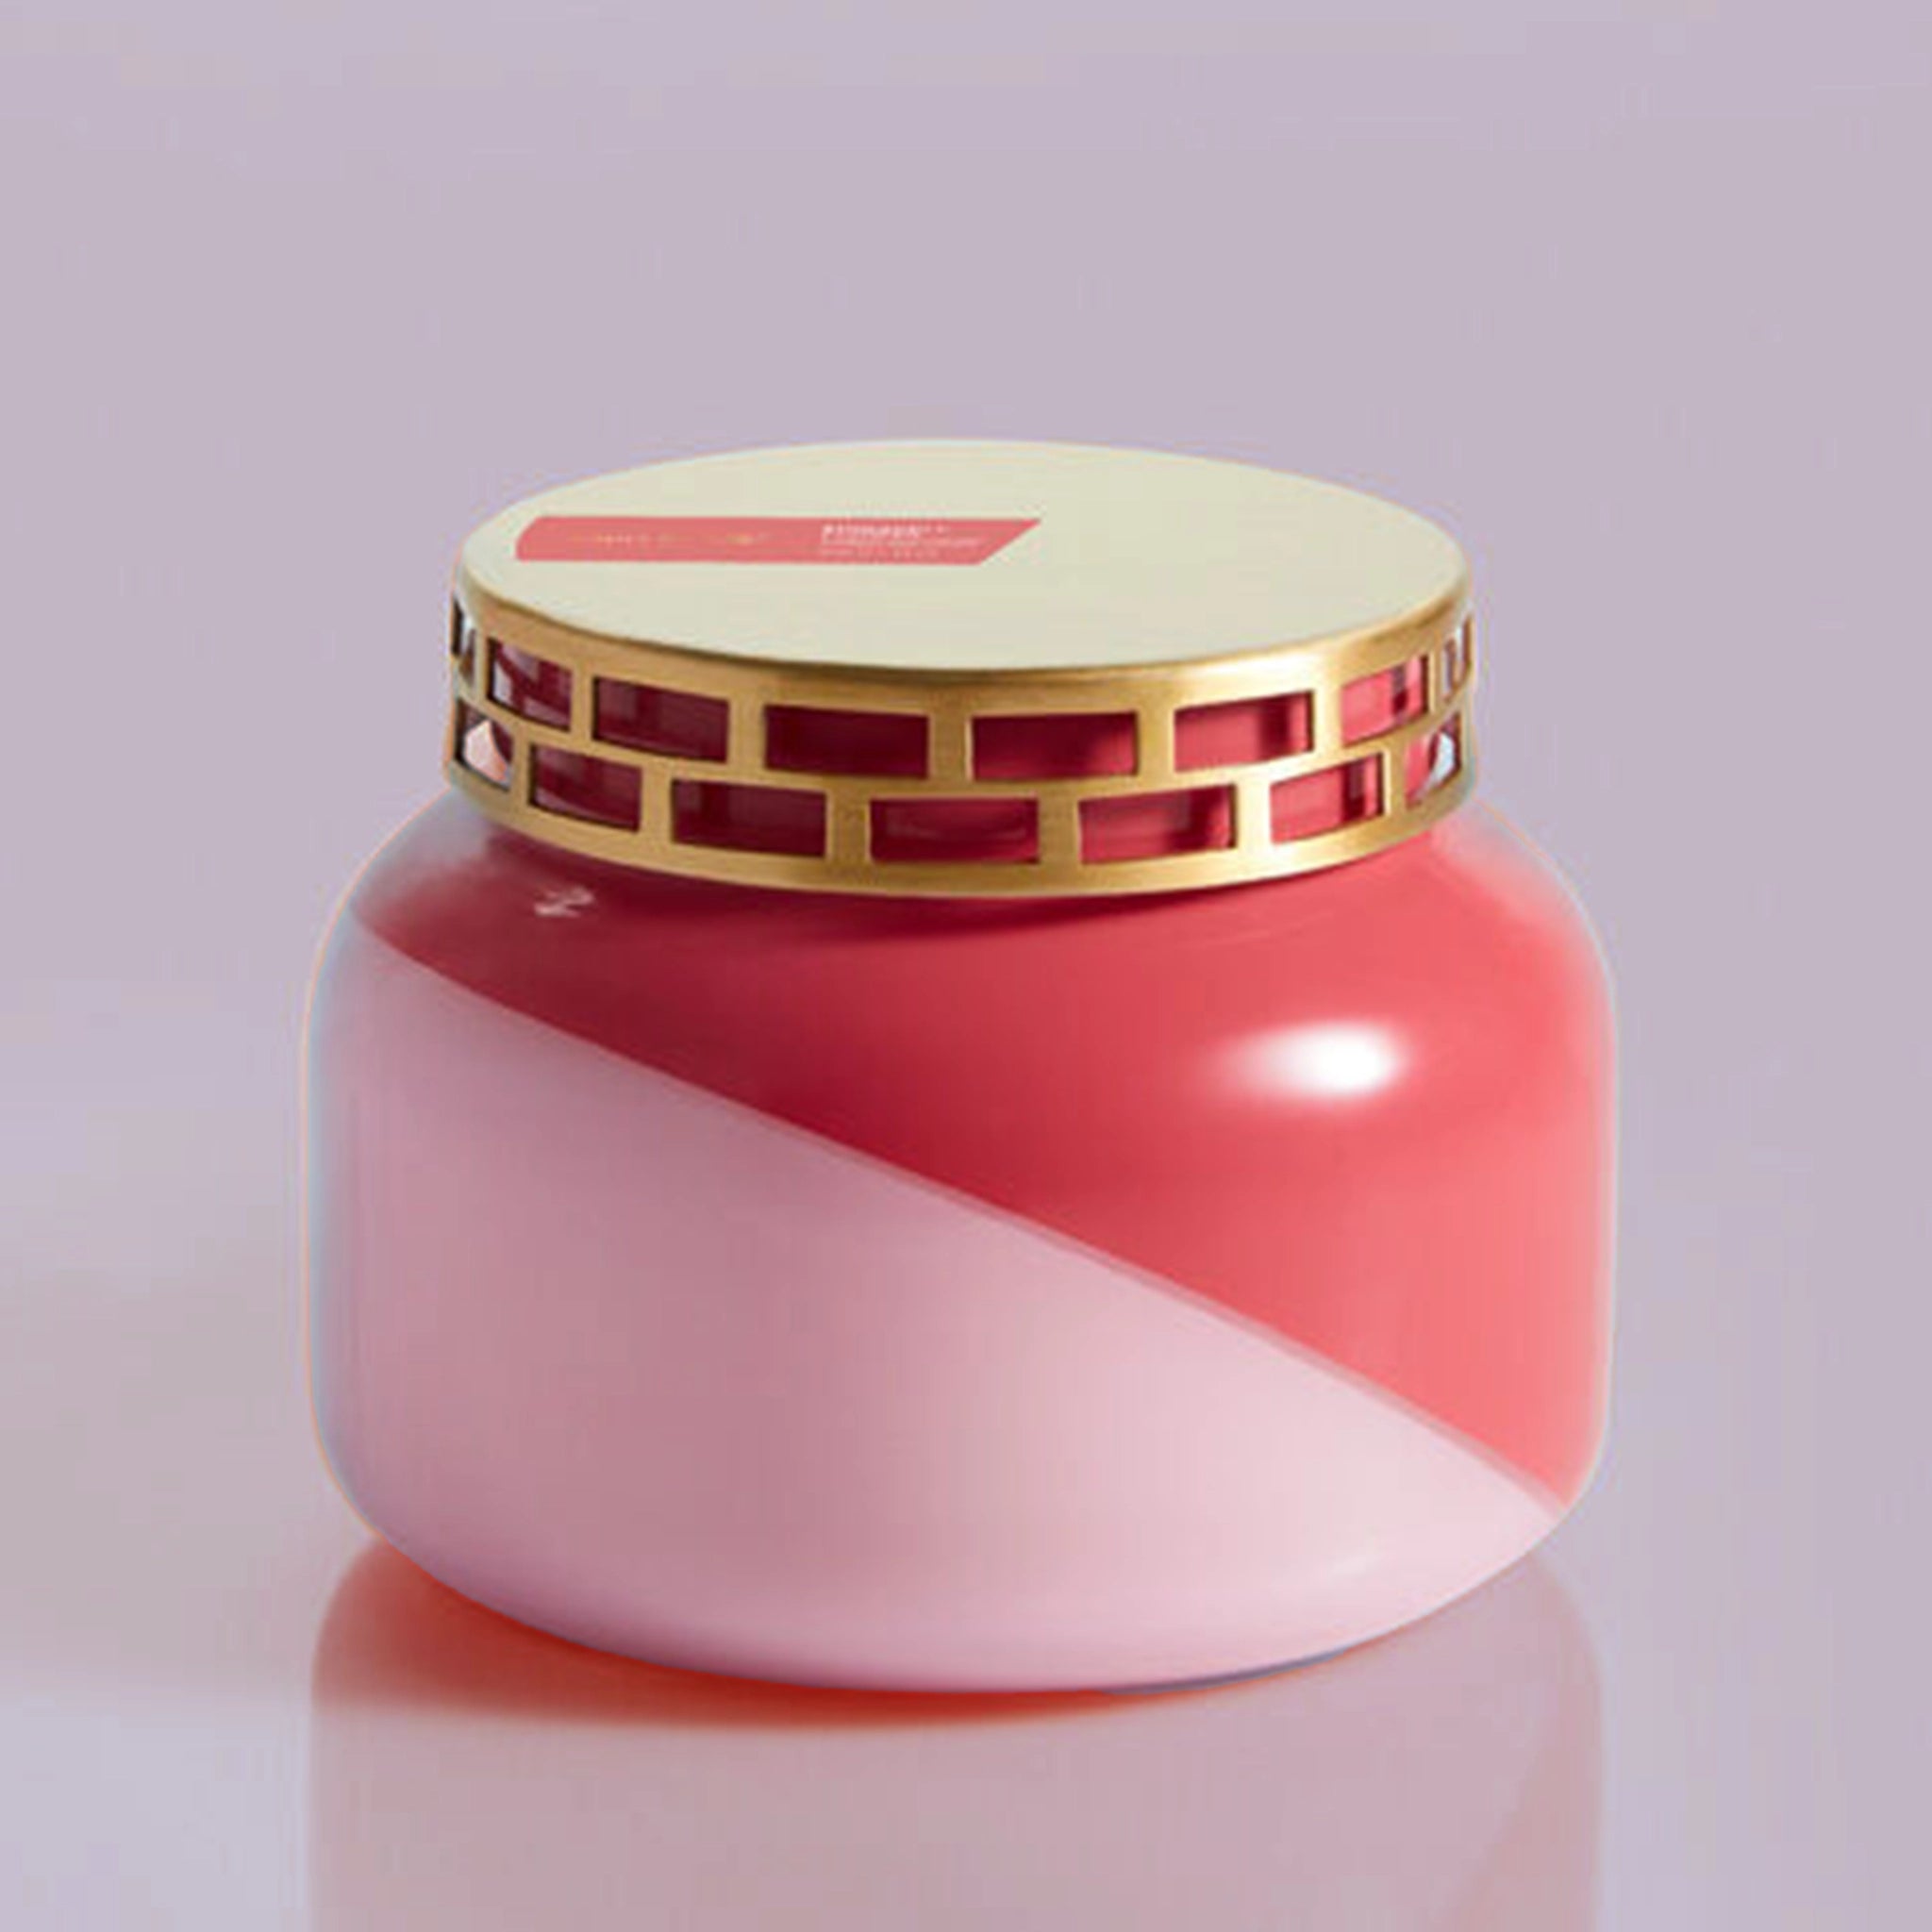 A glass candle jar with a two toned design featuring a light pink and a darker pink that is split diagonally with a gold metal lid with rectangle cut out detailing around the edge.